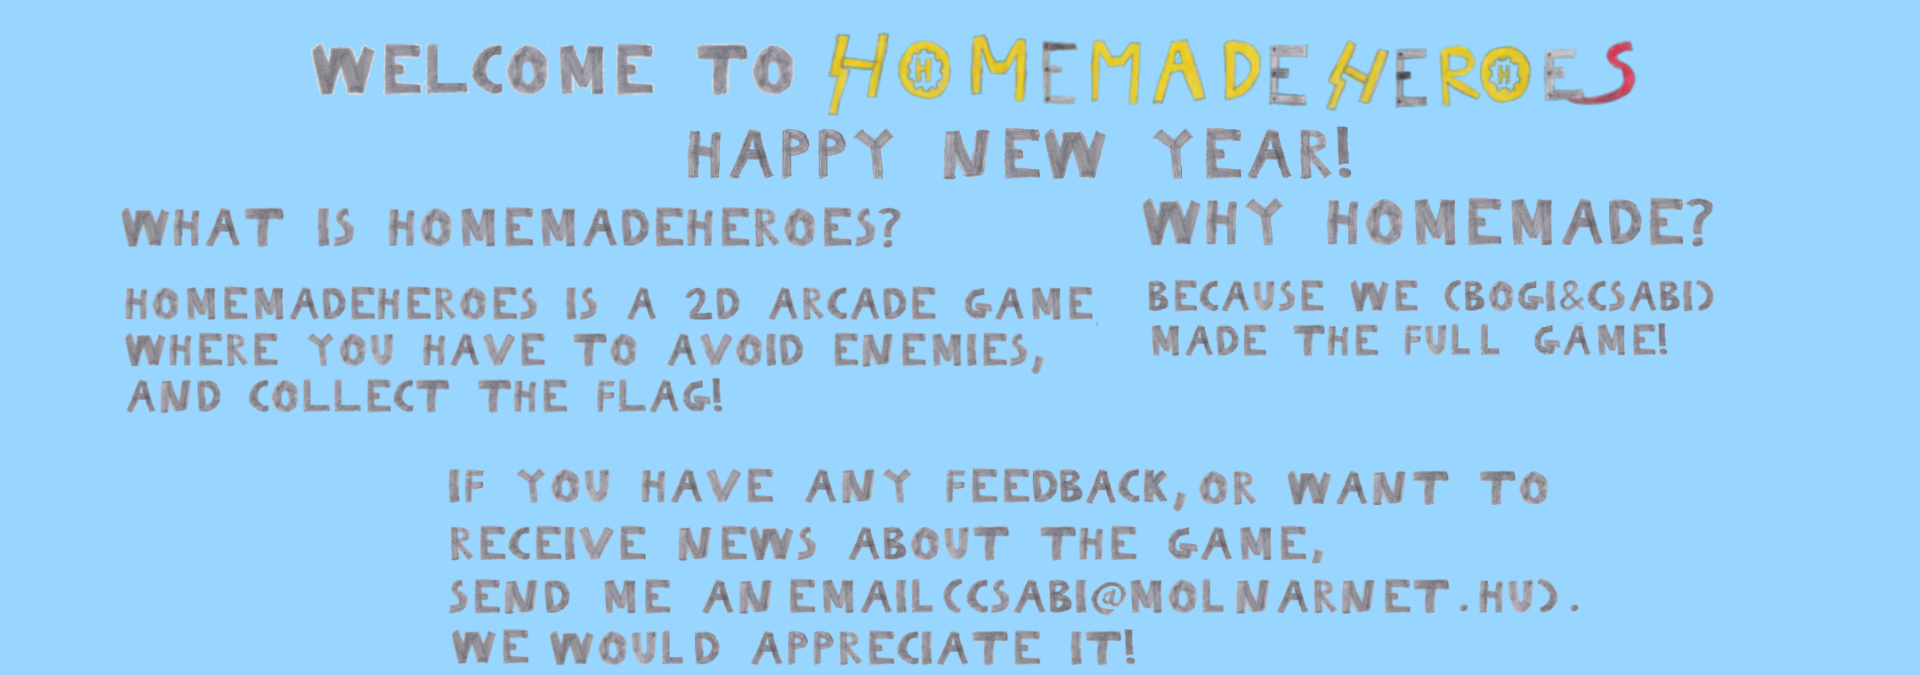 WELCOME TO HOMEMDEHEROES What is HomemadeHeroes? HomemadeHeores is a 2D arcade game, where you have to avoid enemies, and collect the flag! Why Homemade? Because we (Bogi&Csabi) made the full game! If you have any feedback, or want to receive news about the game, send me an email(csabi@molnarnet.hu). We would appreciate it!